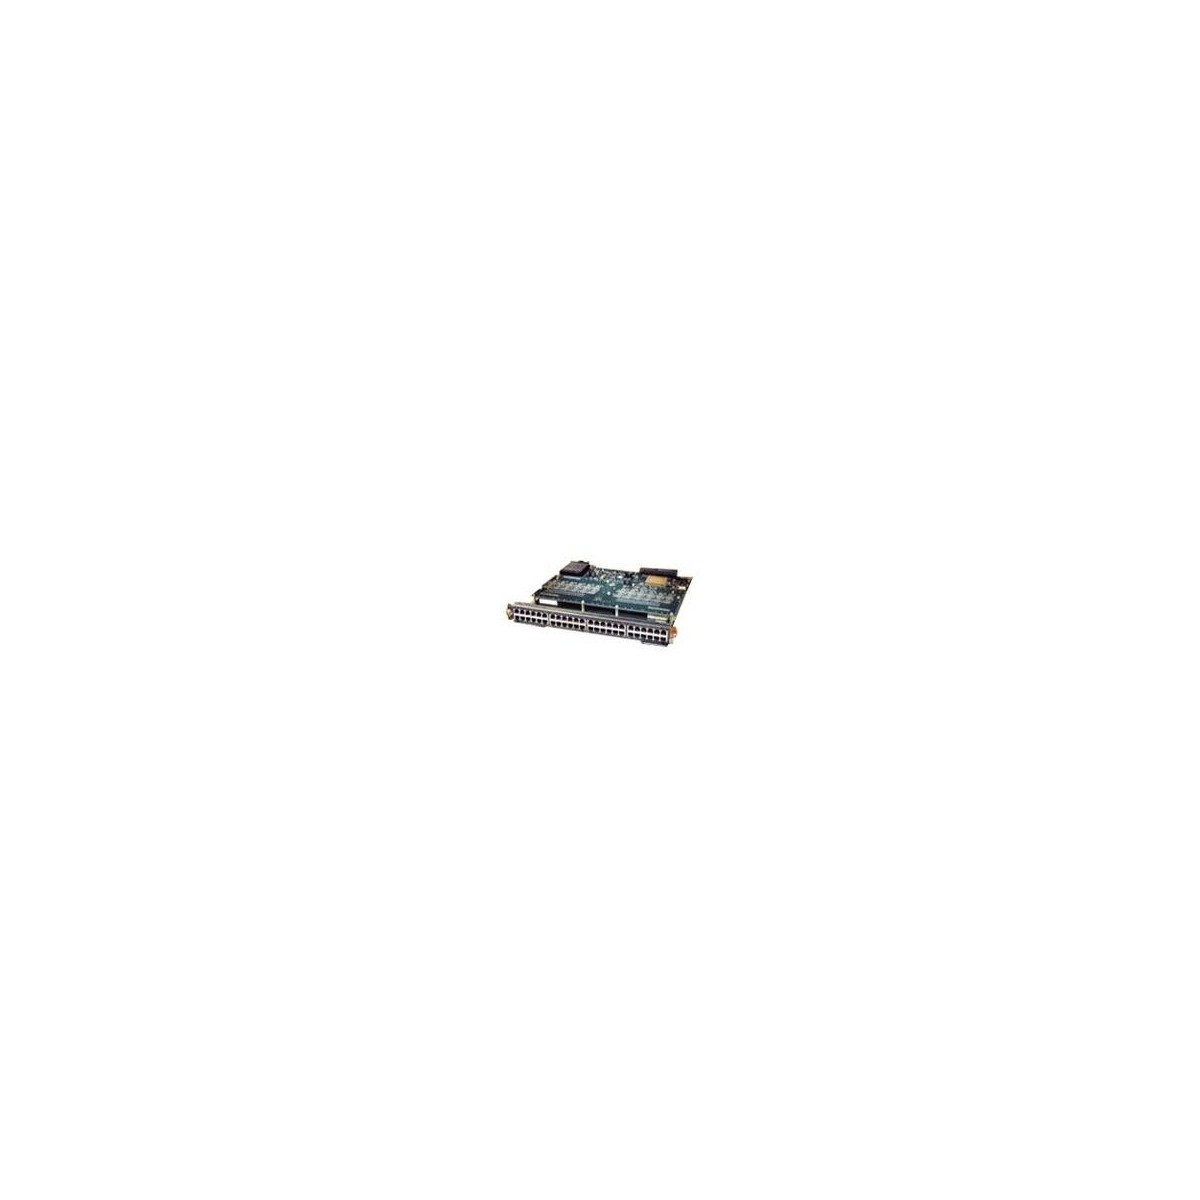 Cisco WS-X6148-RJ45 Catalyst 6500 48-Port 10/100 RJ-45 Module Upgradable to - Switch - 0.1 Gbps